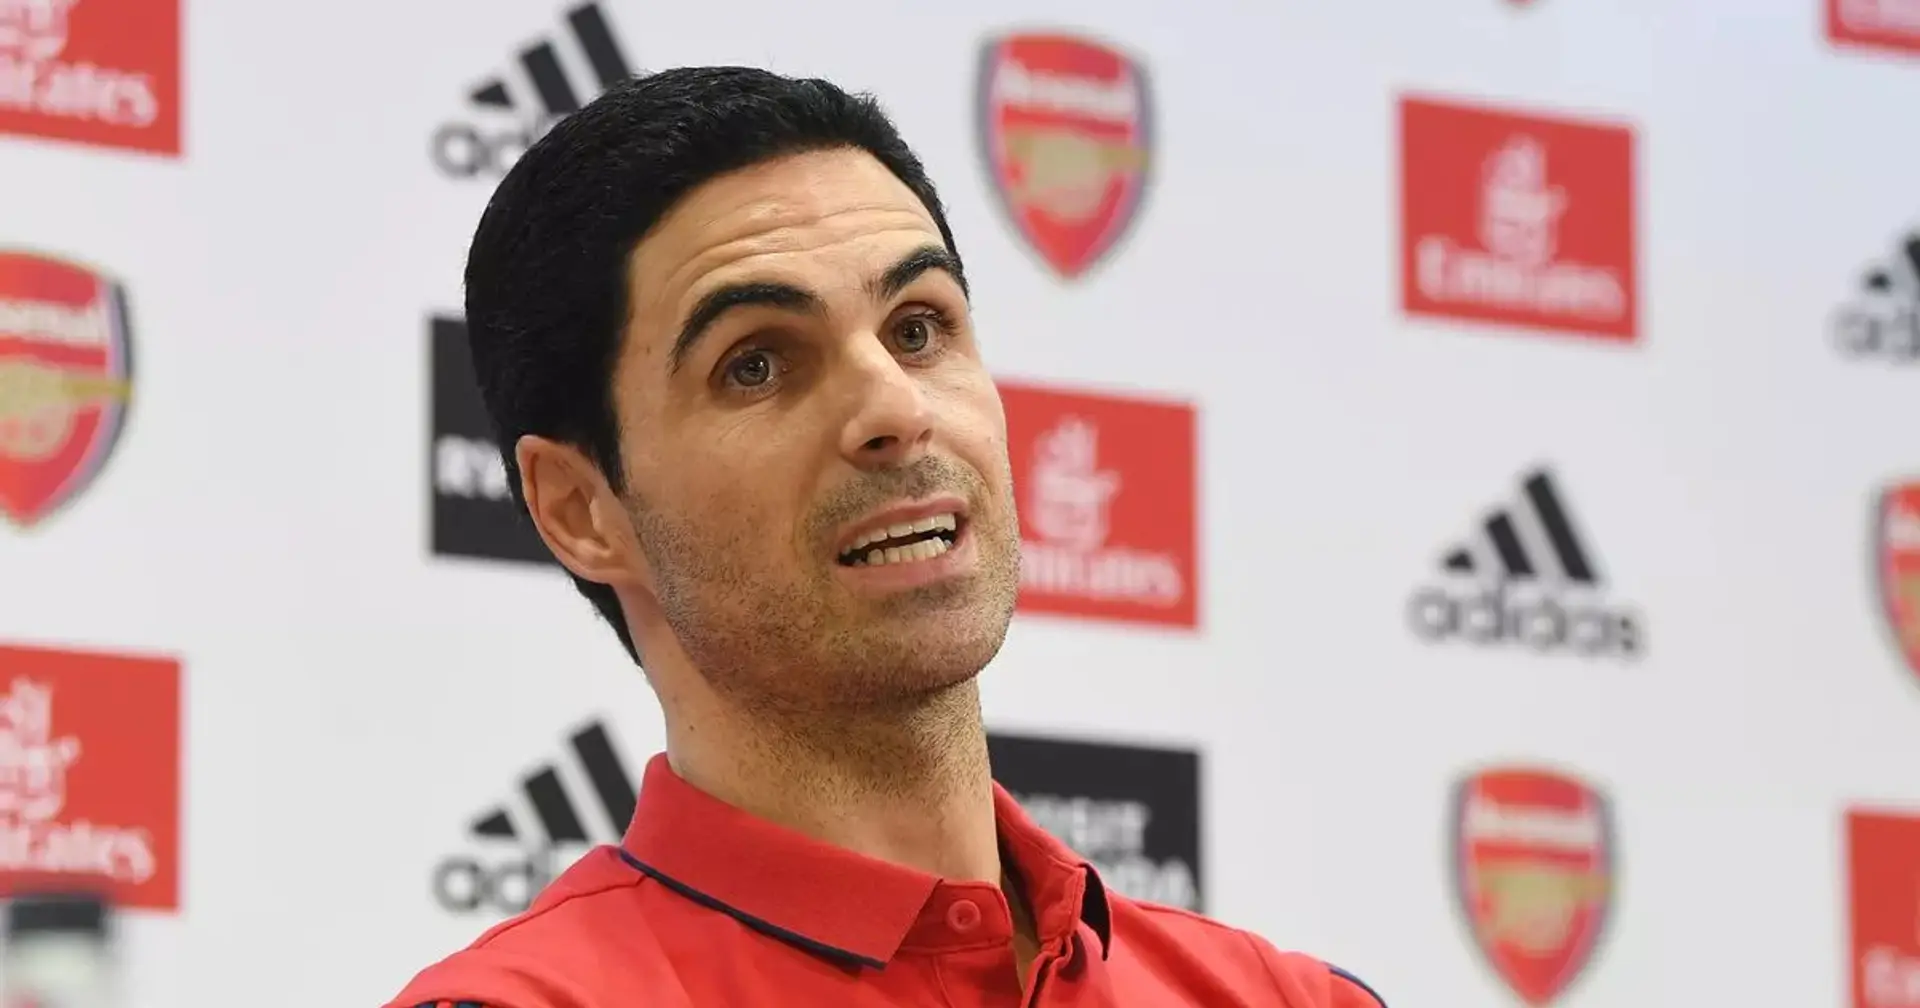 'I knew you were going to ask me': Mikel Arteta responds to question over VAR controversies